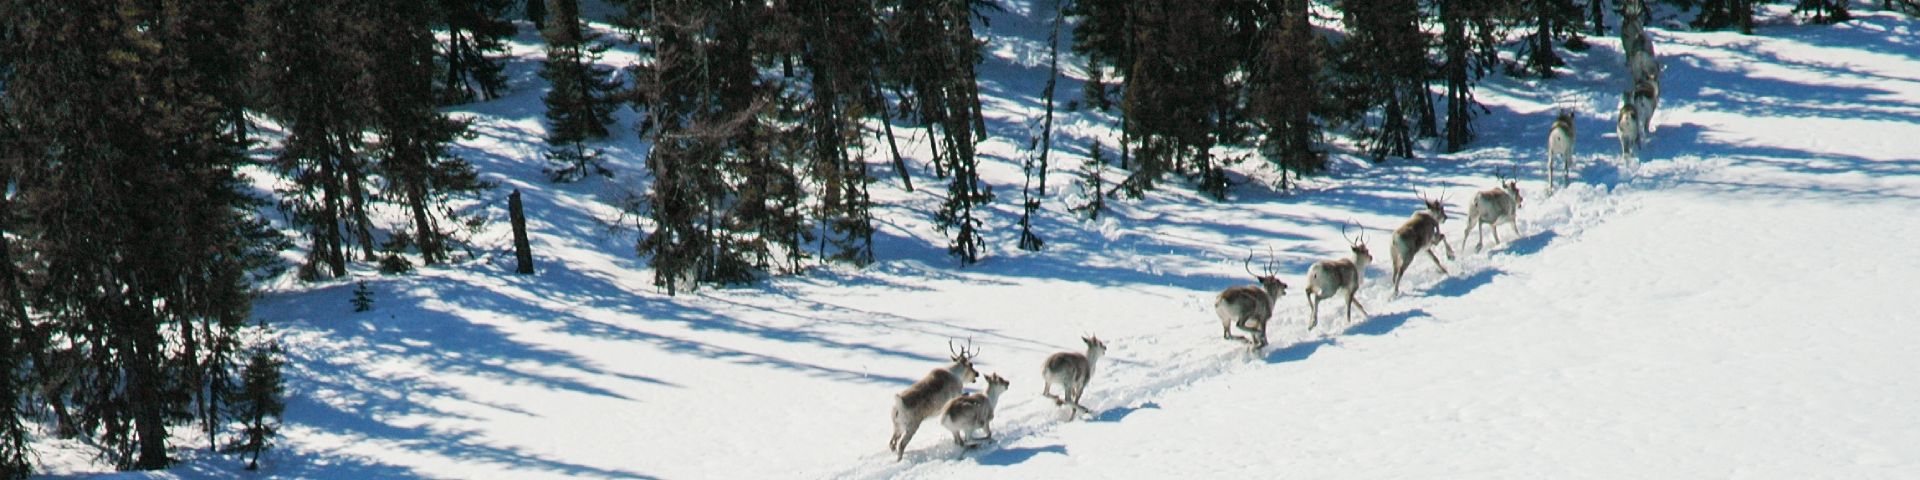 A group of caribou run in the snow at Akami-Uapishkᵁ-KakKasuak-Mealy Mountains National Park Reserve